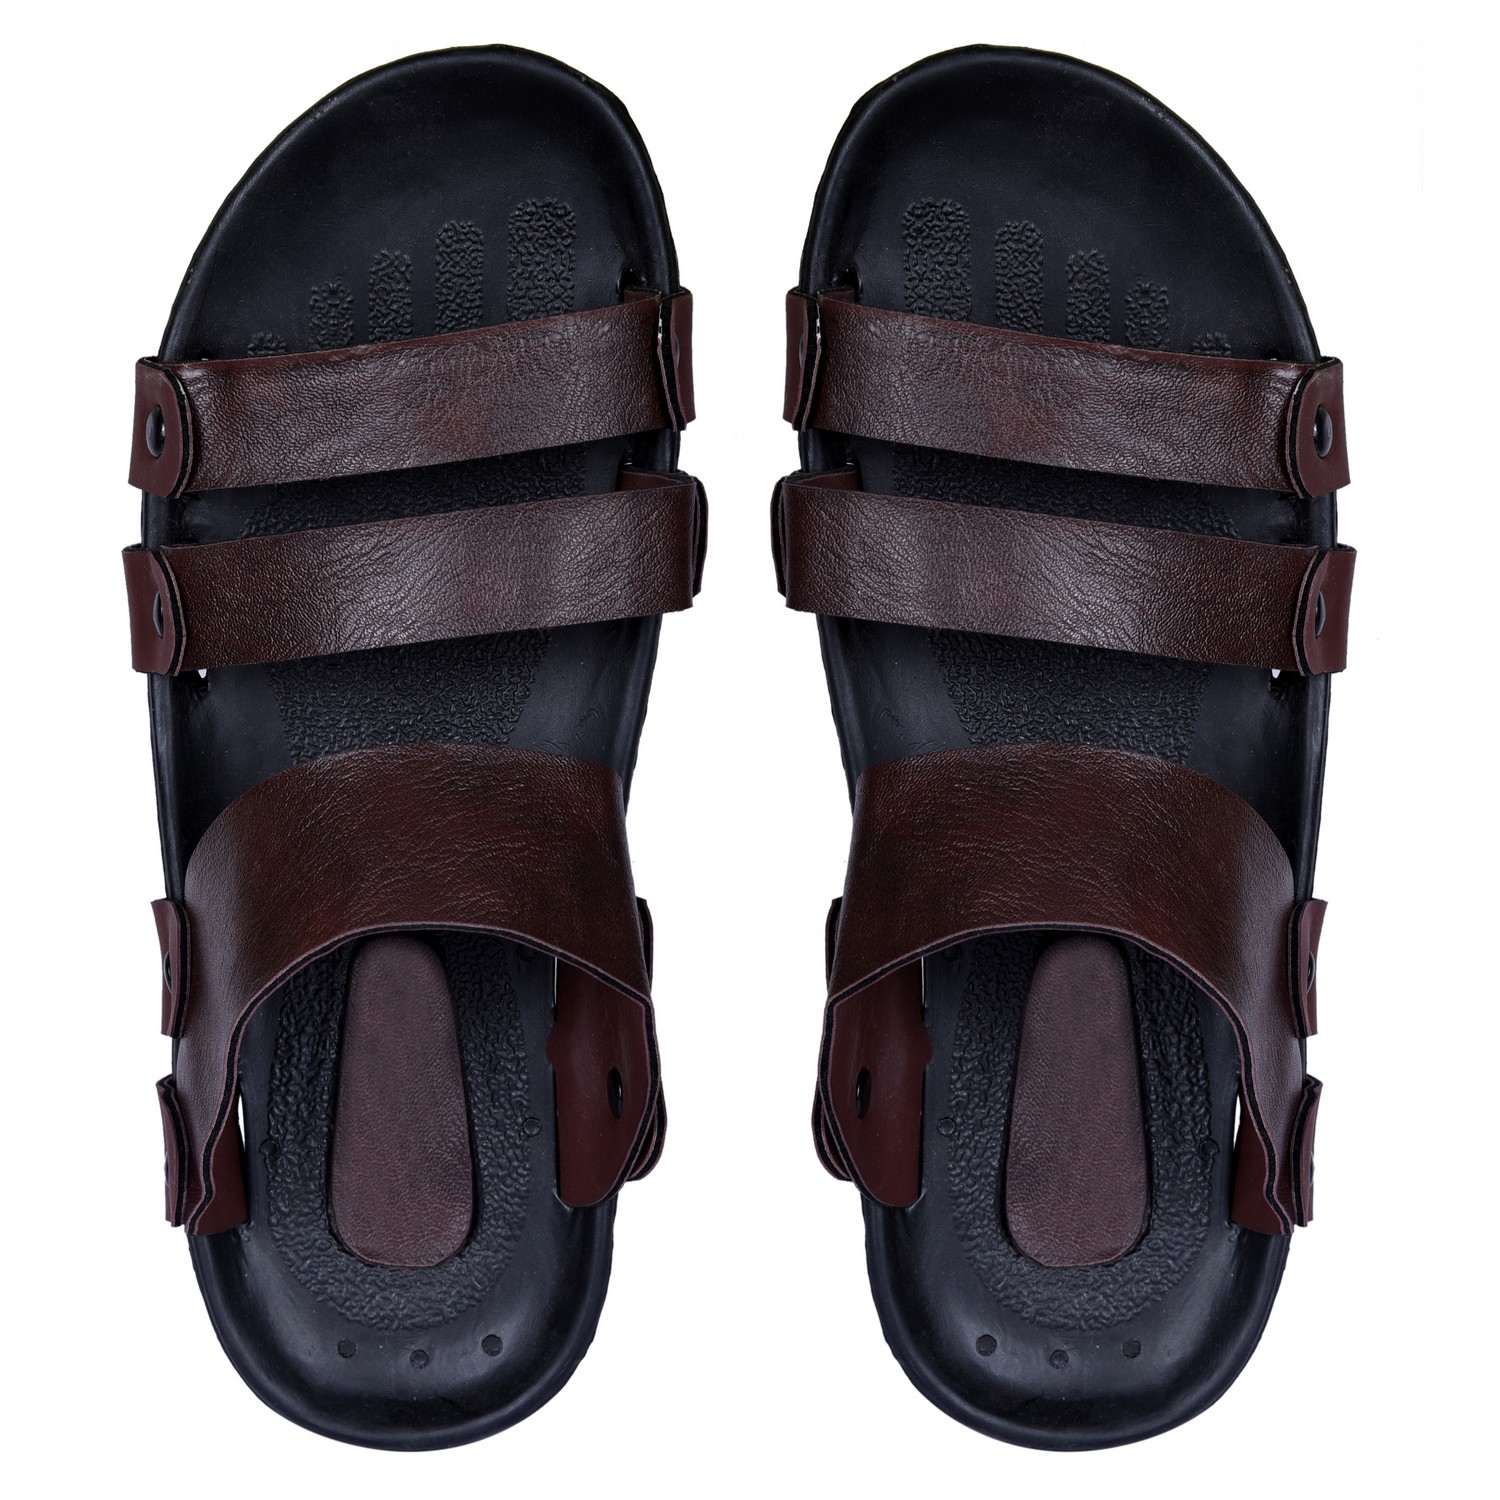 Buy Style Height Floaters For Men's Online @ ₹395 from ShopClues